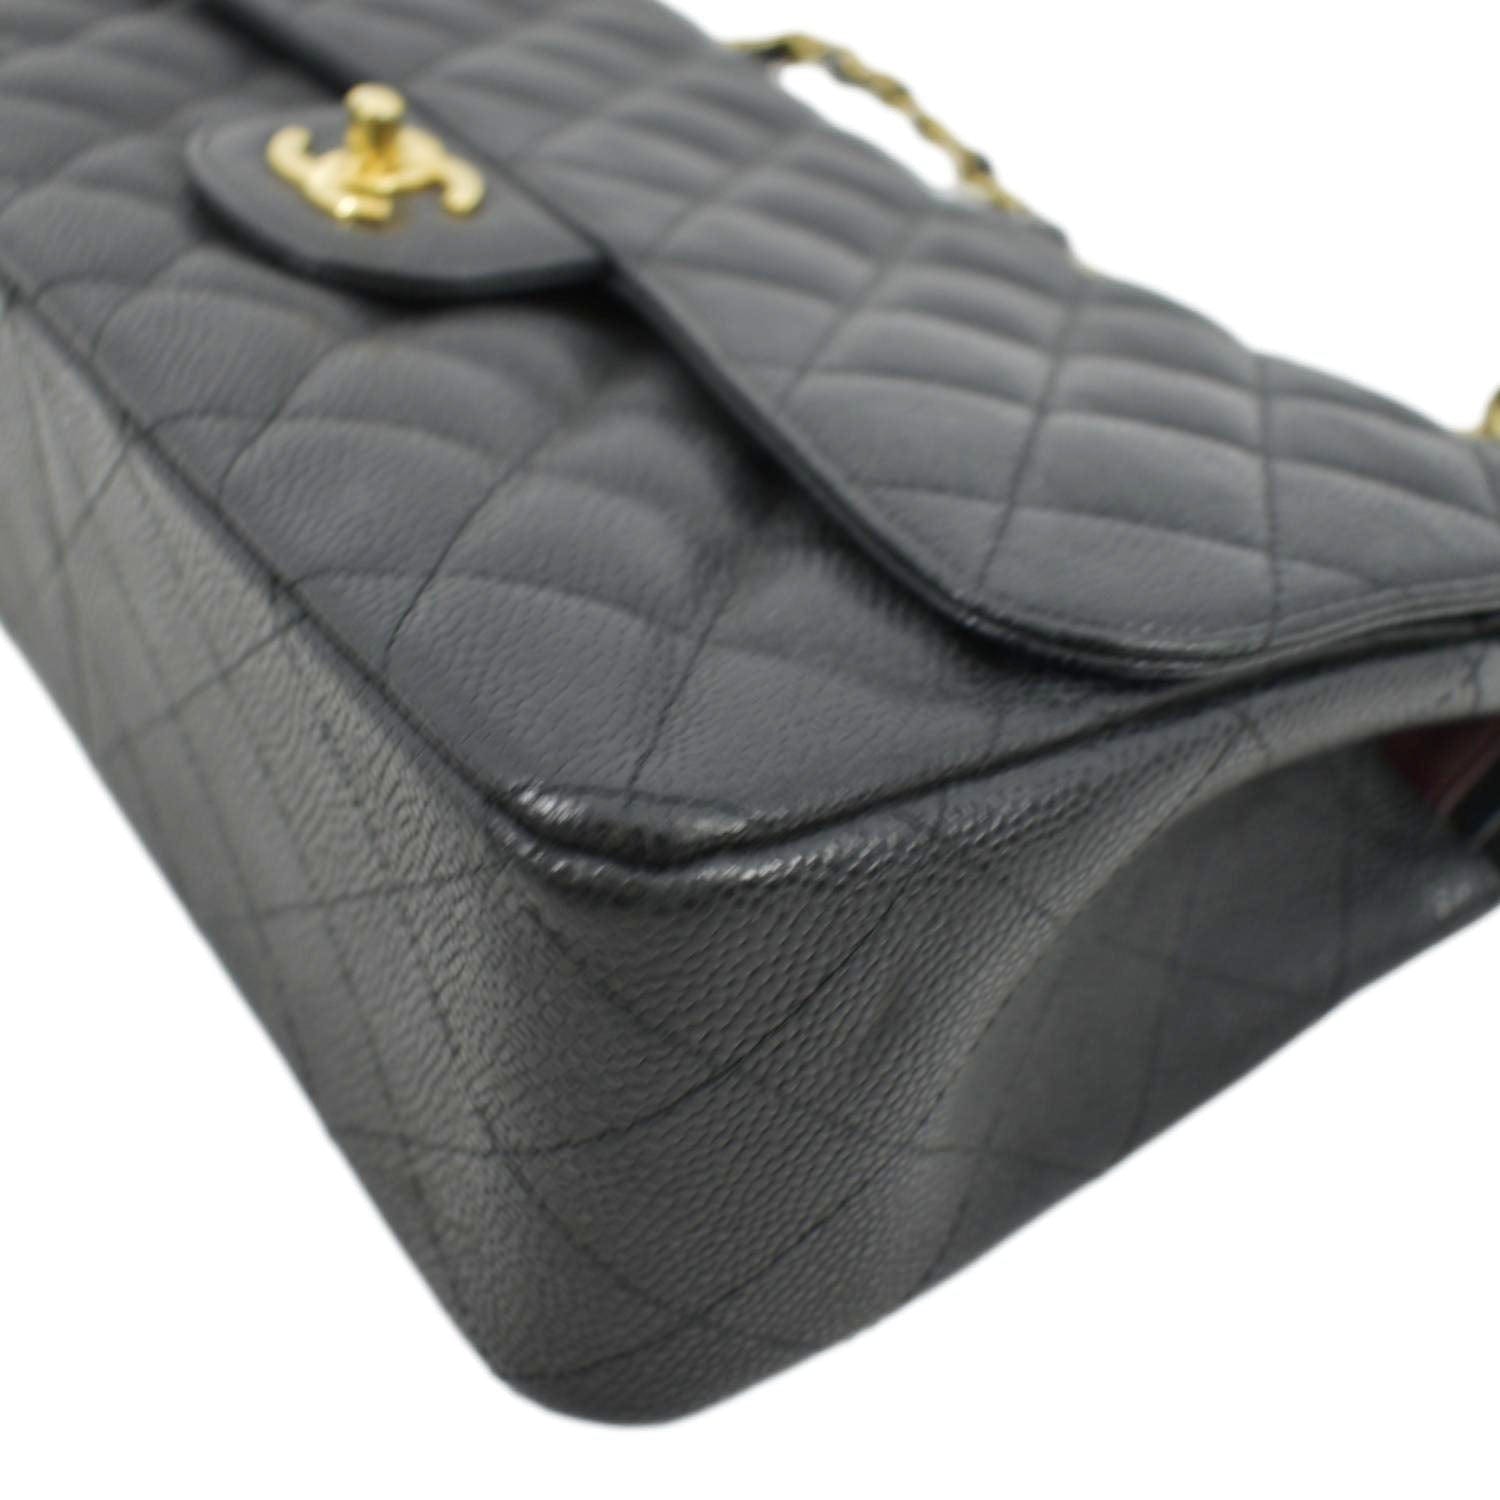 Chanel Classic Double Flap Quilted Caviar Leather Shoulder Bag Black